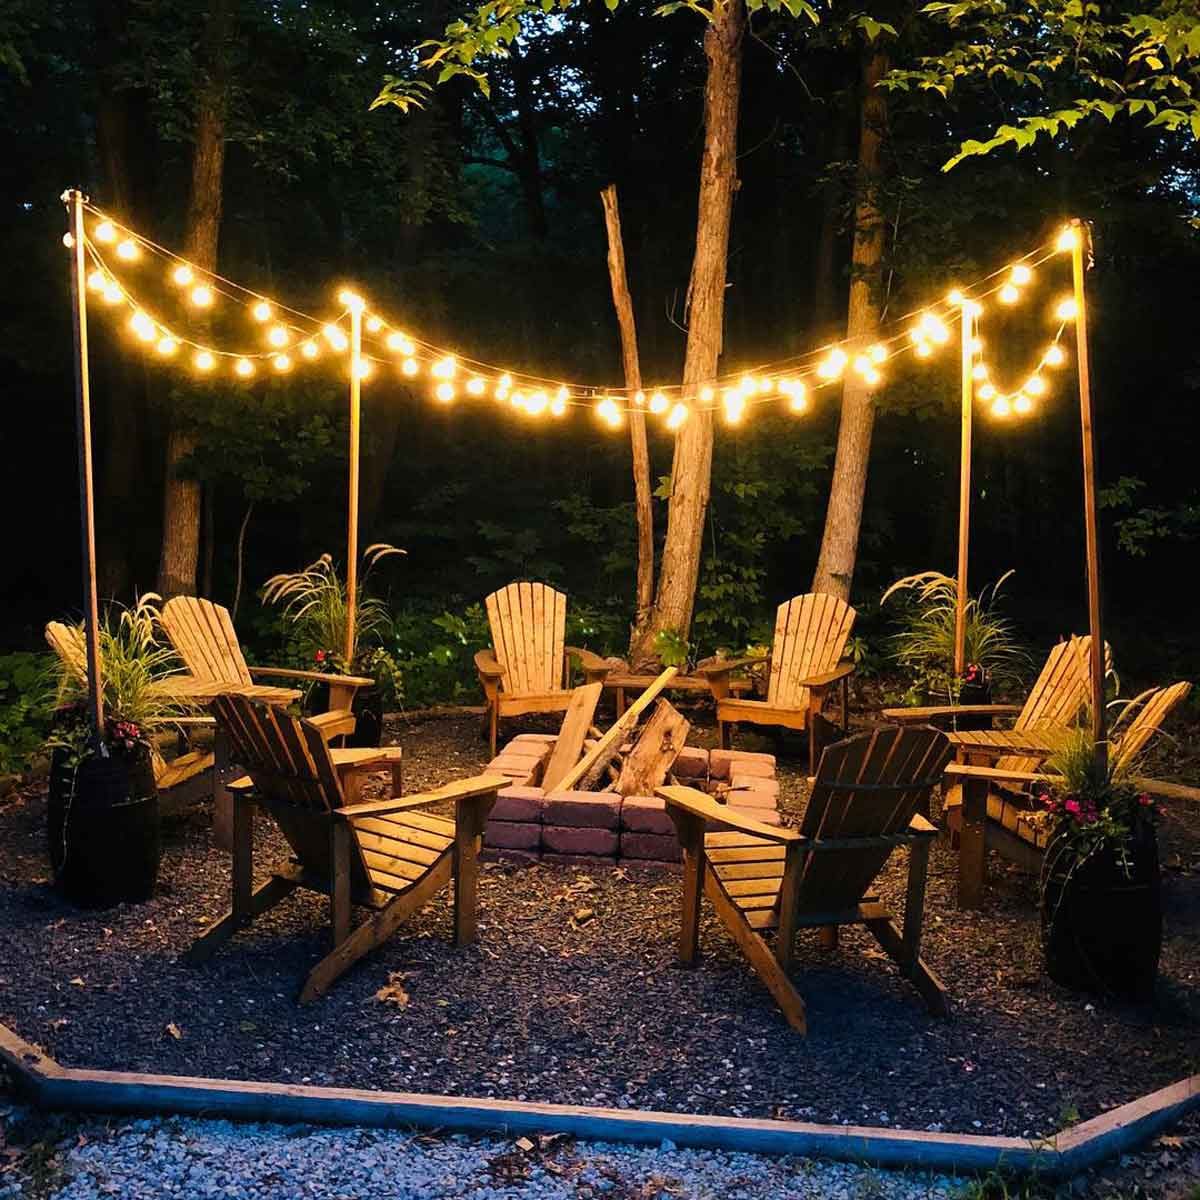 11 Outdoor Fire Pit Lighting Ideas, Outdoor Fire Pit Lighting